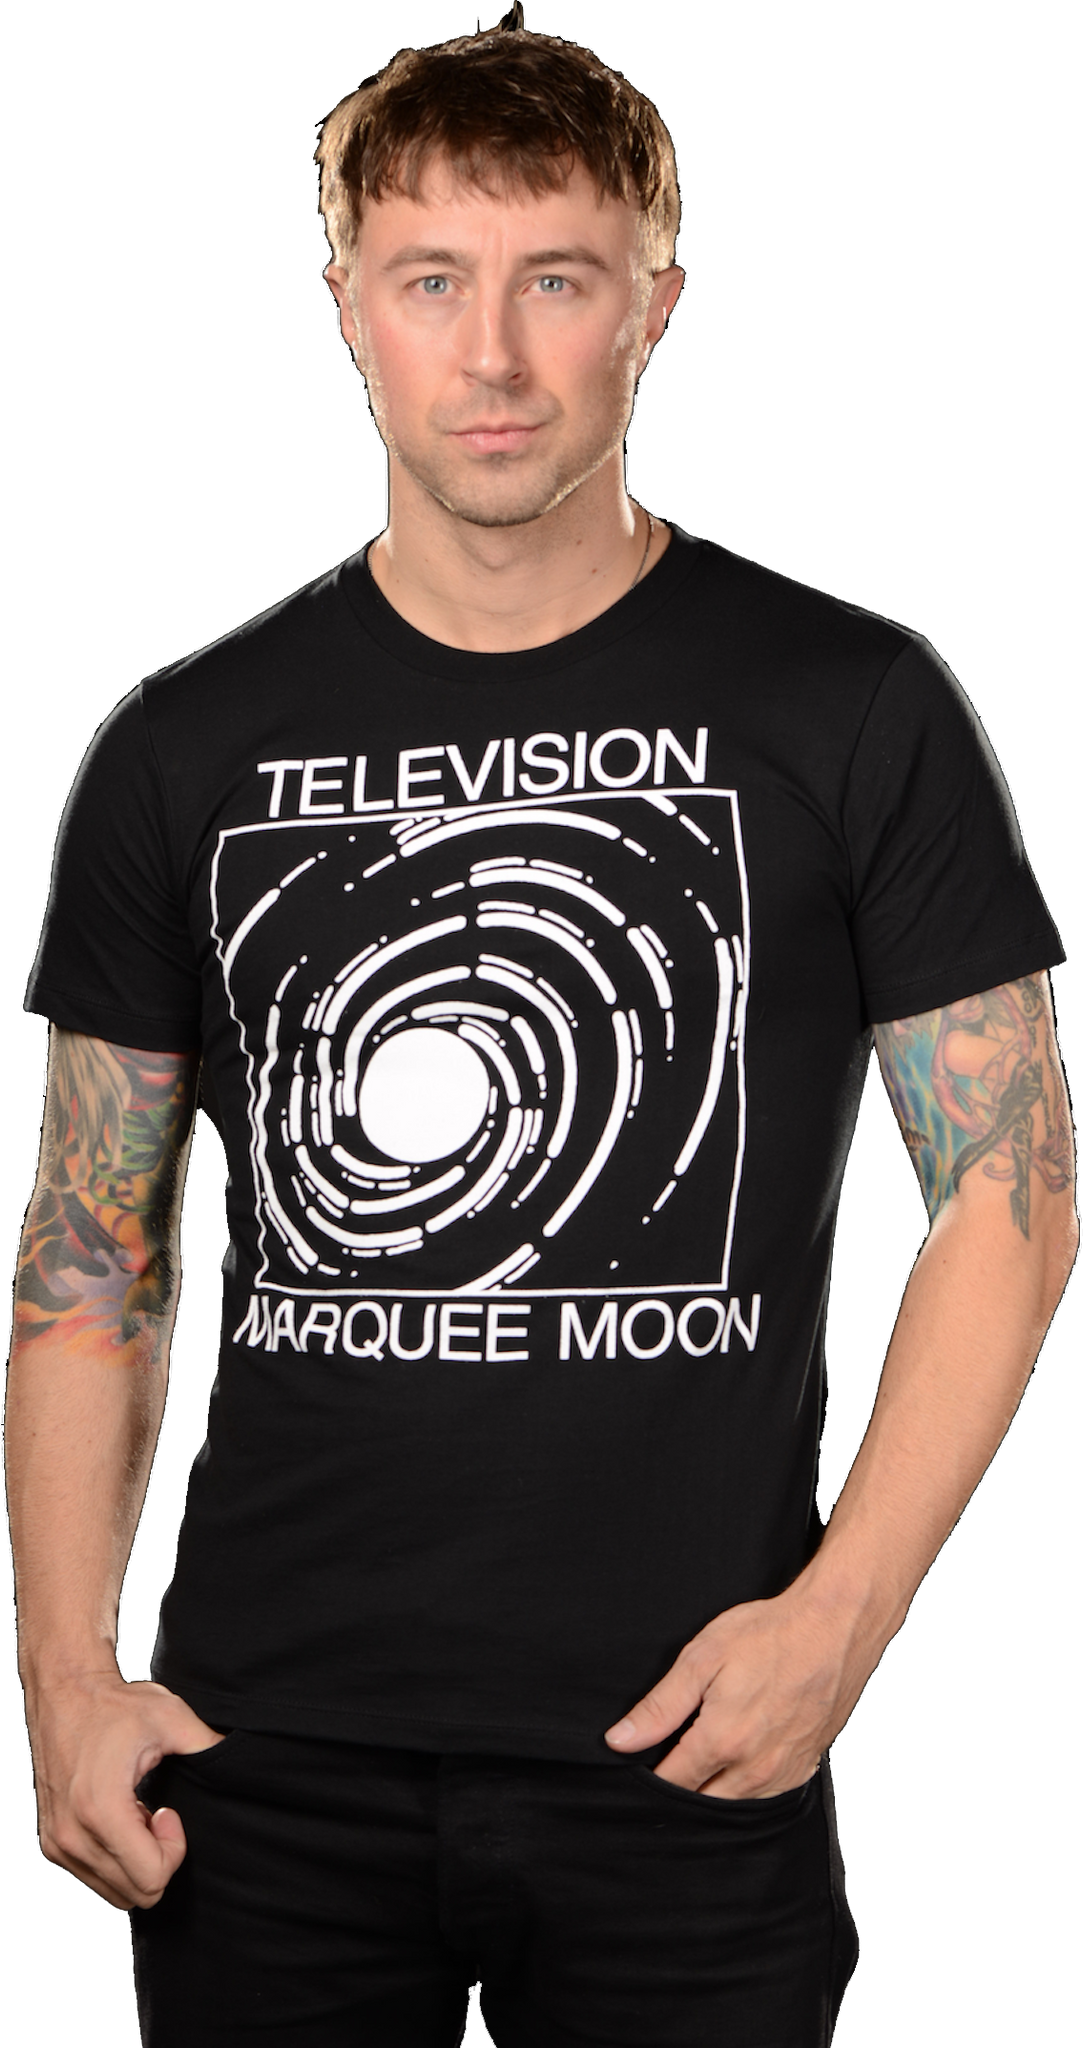 TELEVISION - "MARQUEE MOON" BLACK T-SHIRT